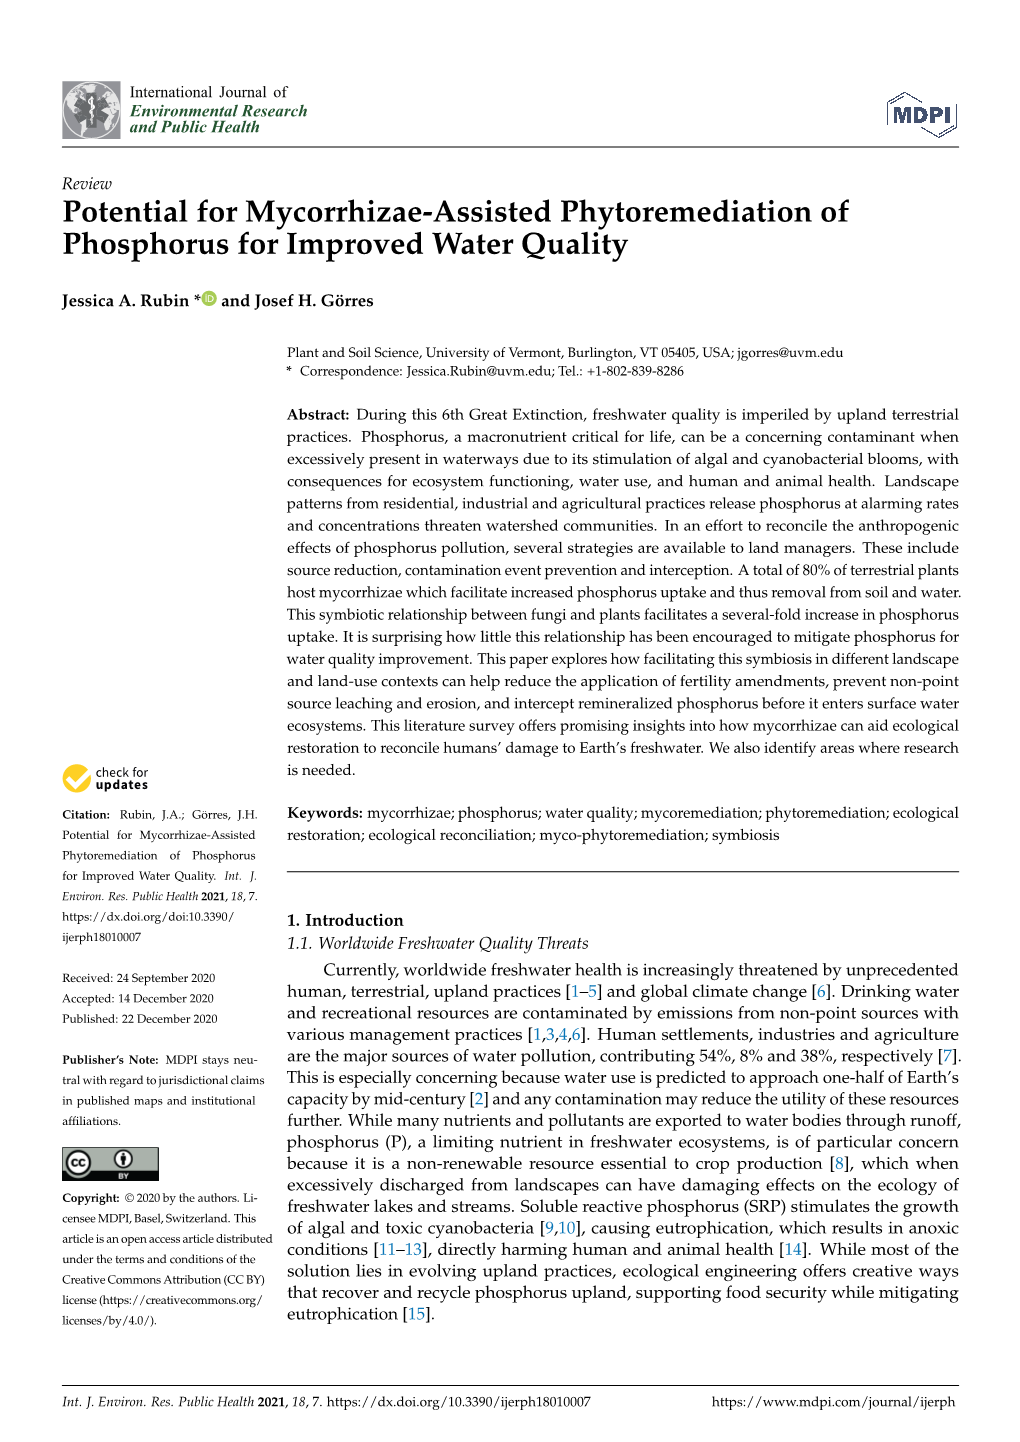 Potential for Mycorrhizae-Assisted Phytoremediation of Phosphorus for Improved Water Quality